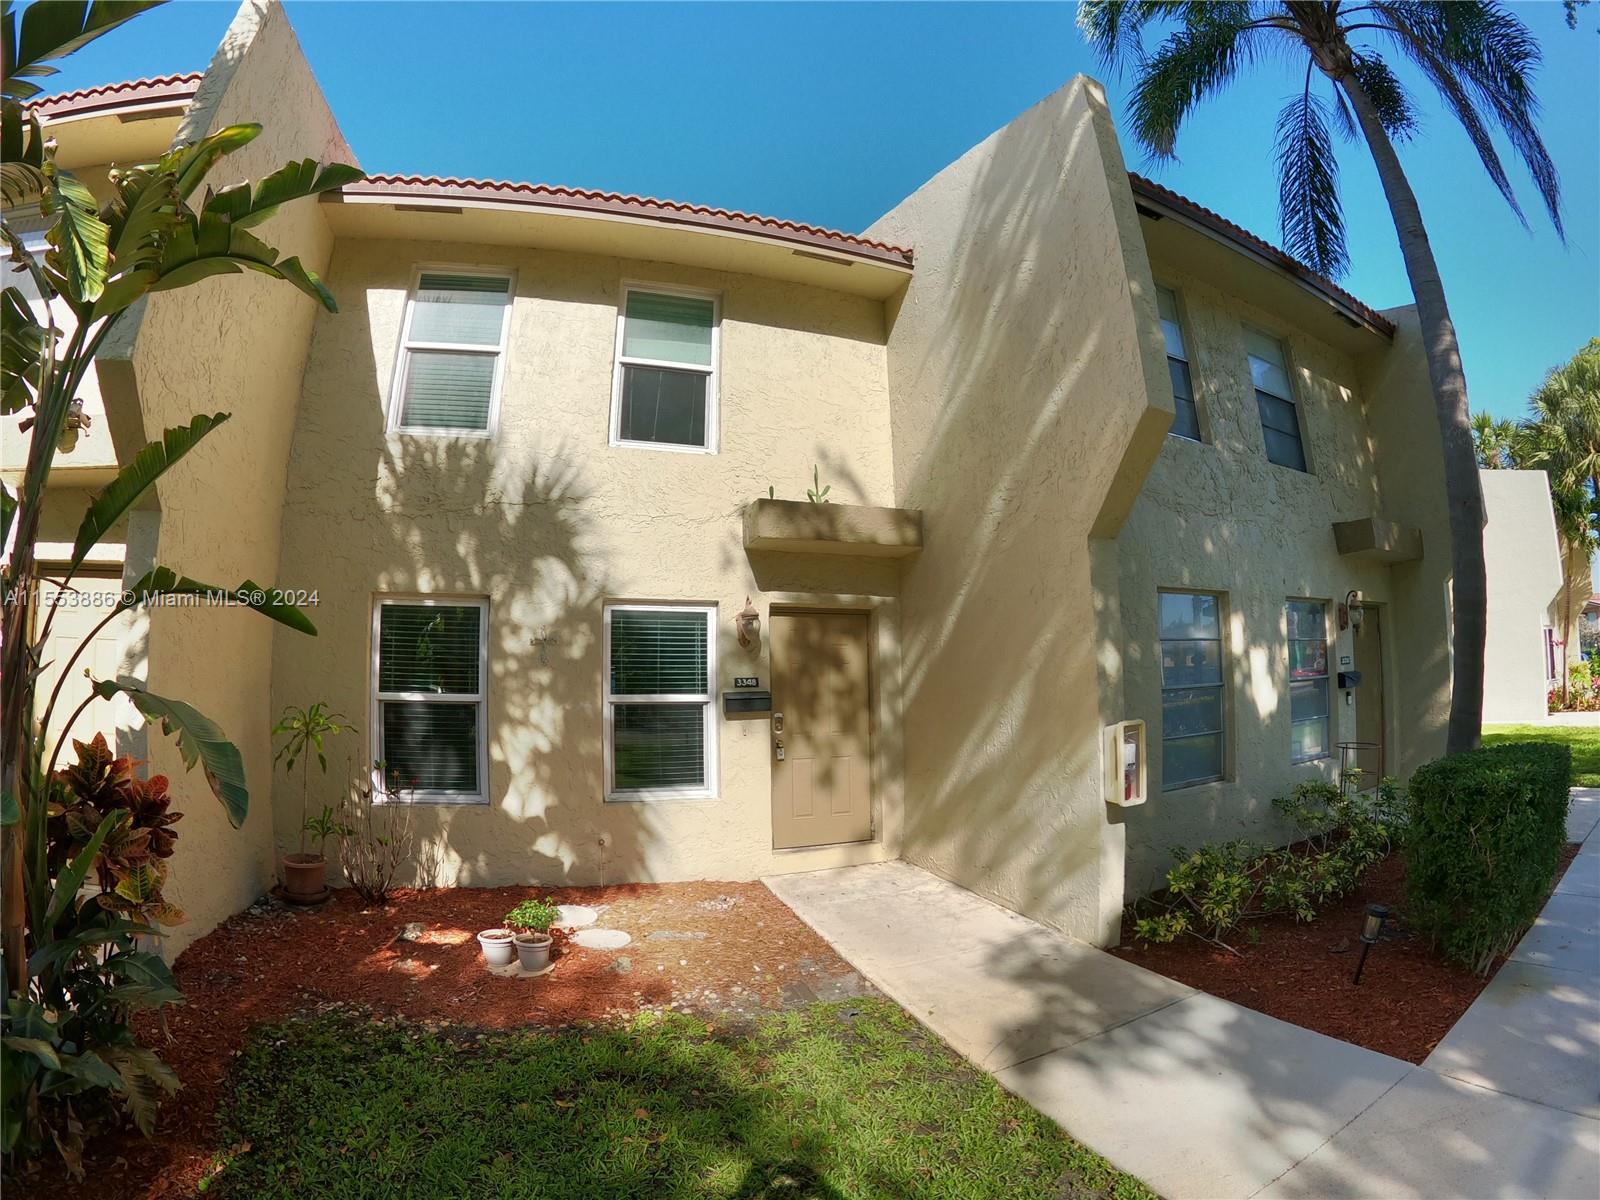 Photo of 3348 NW 85th Ave #3348 in Coral Springs, FL